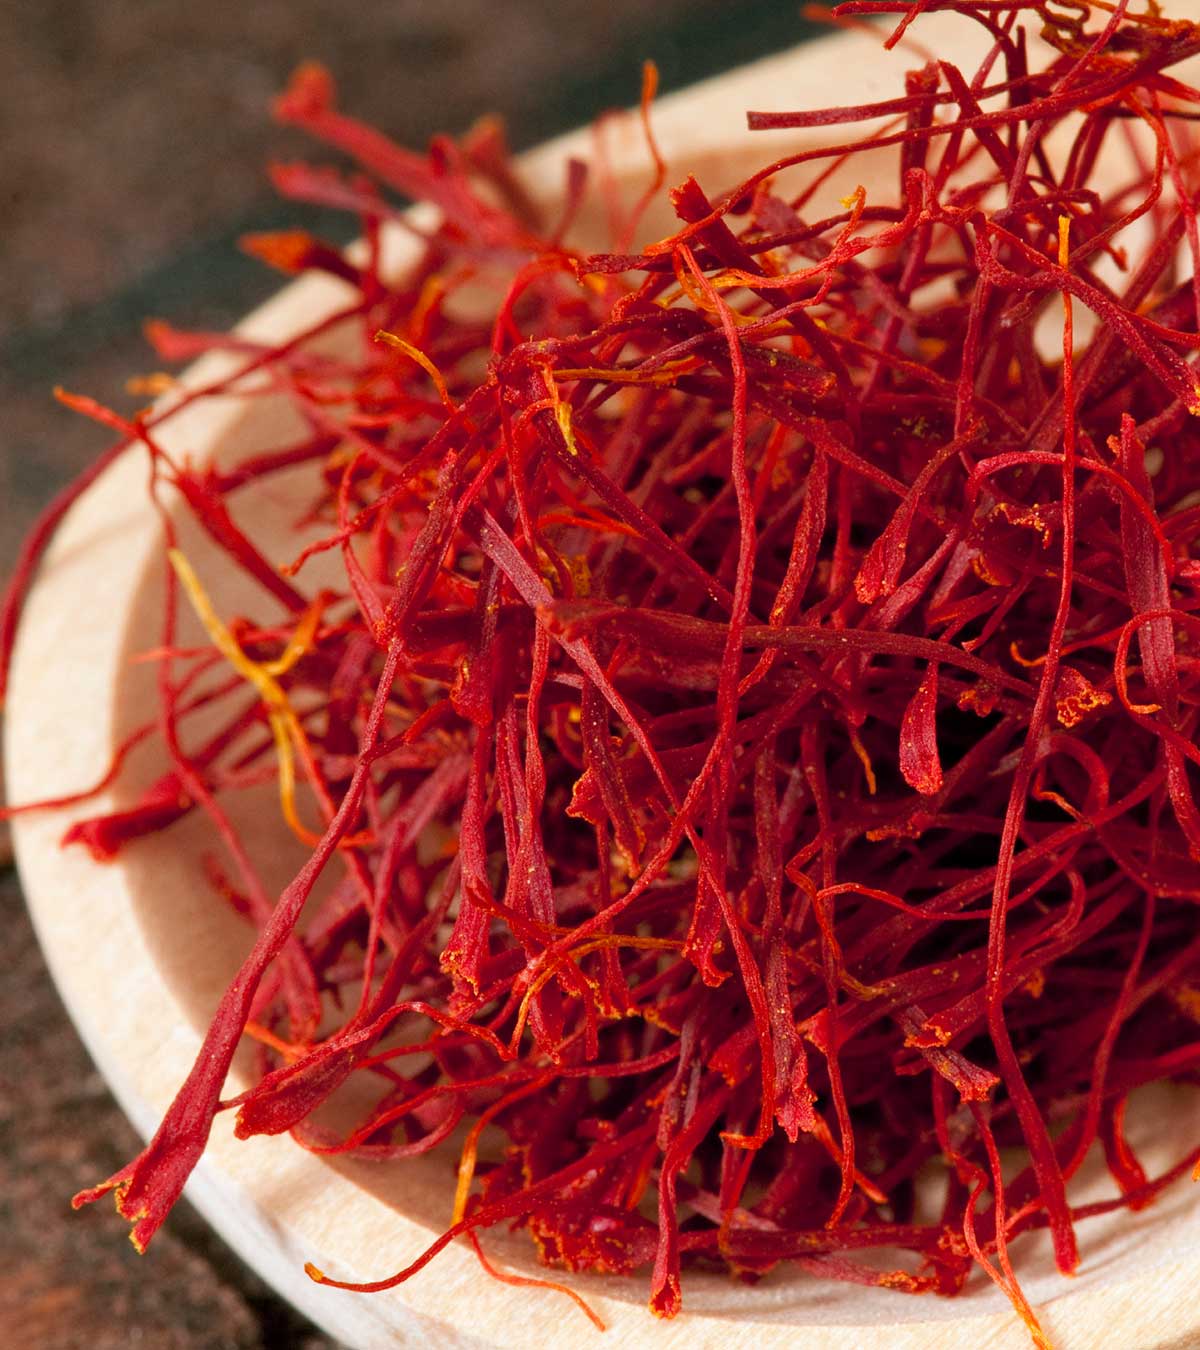 Saffron During Pregnancy: Safety, Benefits And Side Effects